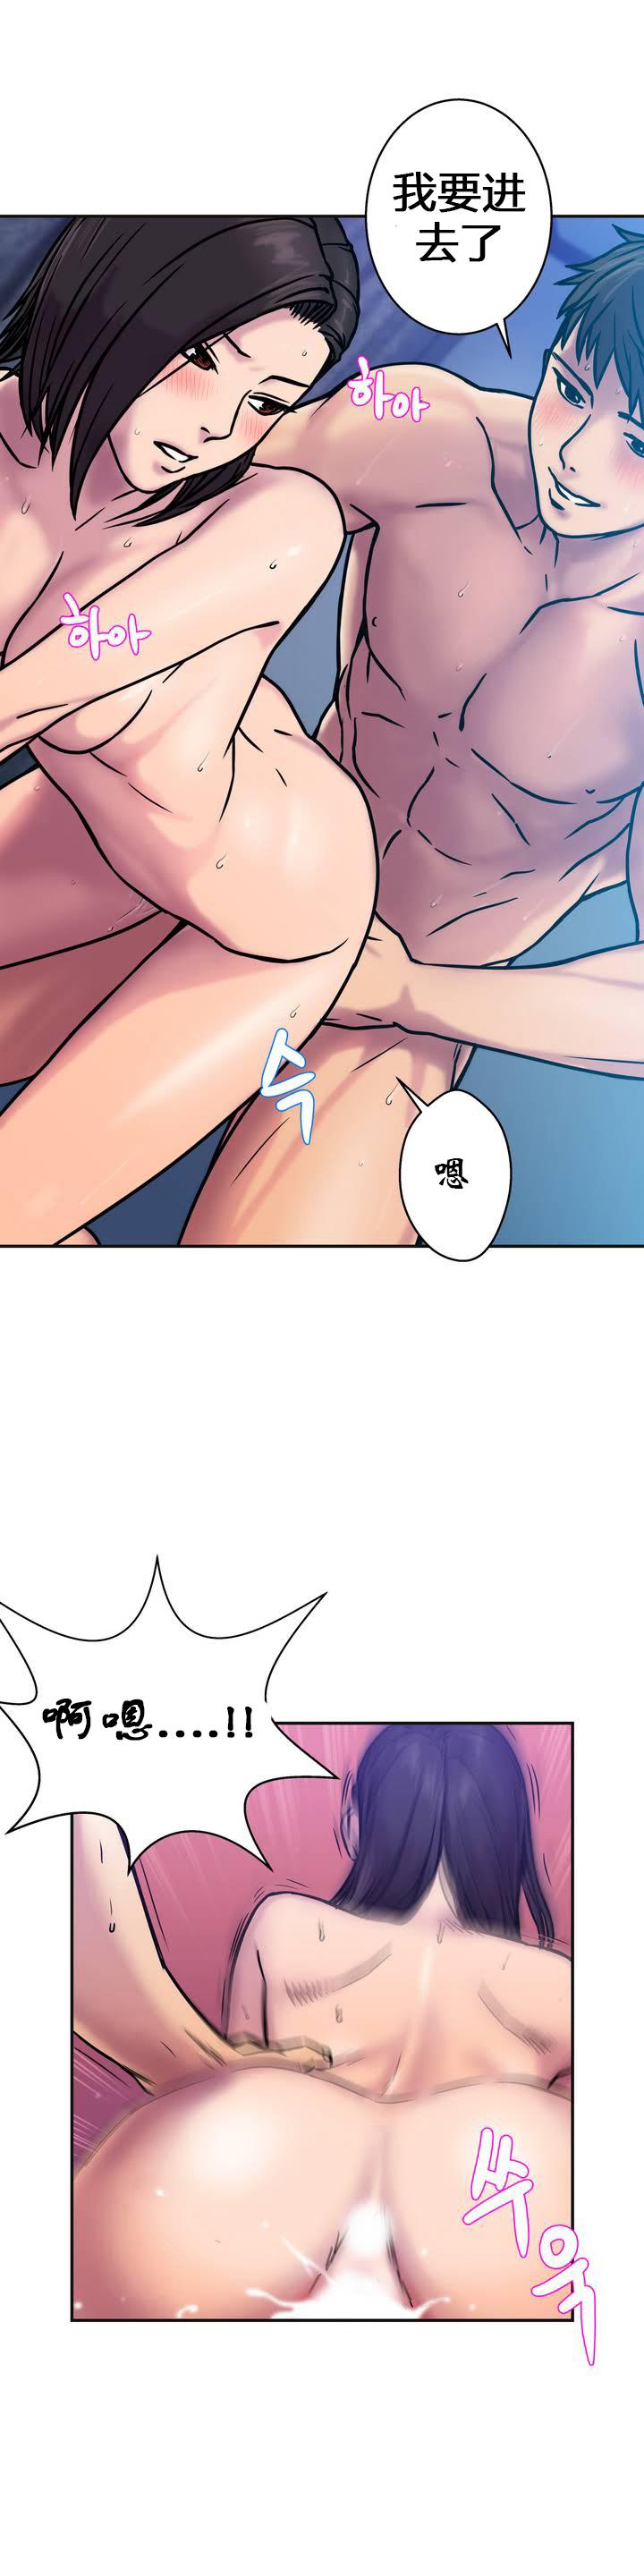 Tinytits 鬼恋 / ghost love CH.1 Cameltoe - Page 5